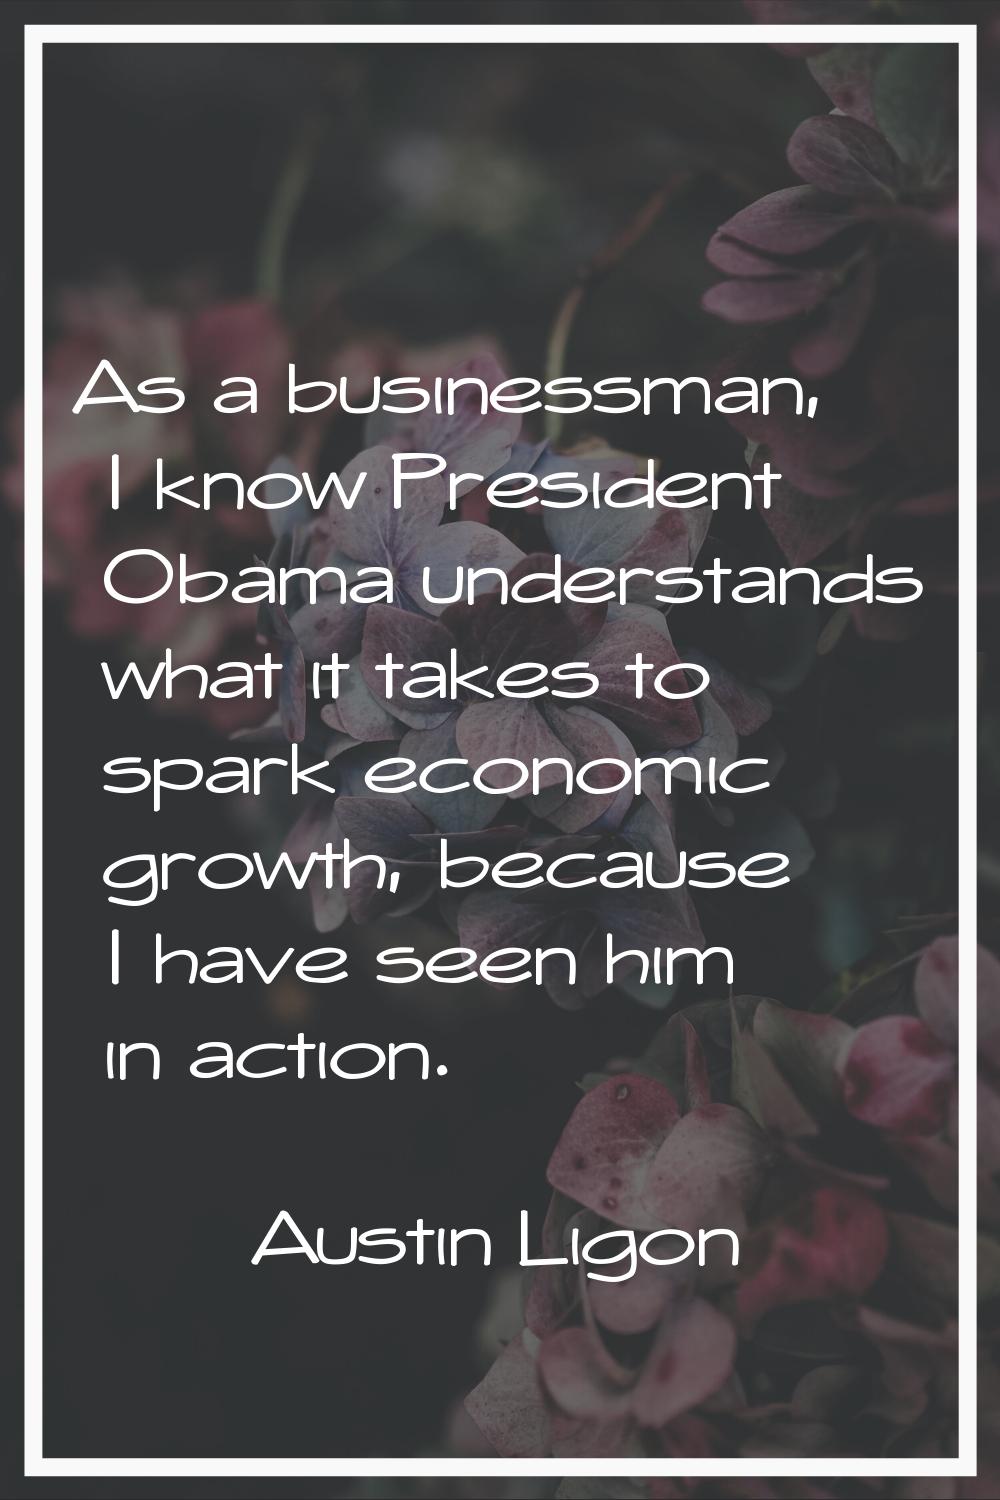 As a businessman, I know President Obama understands what it takes to spark economic growth, becaus